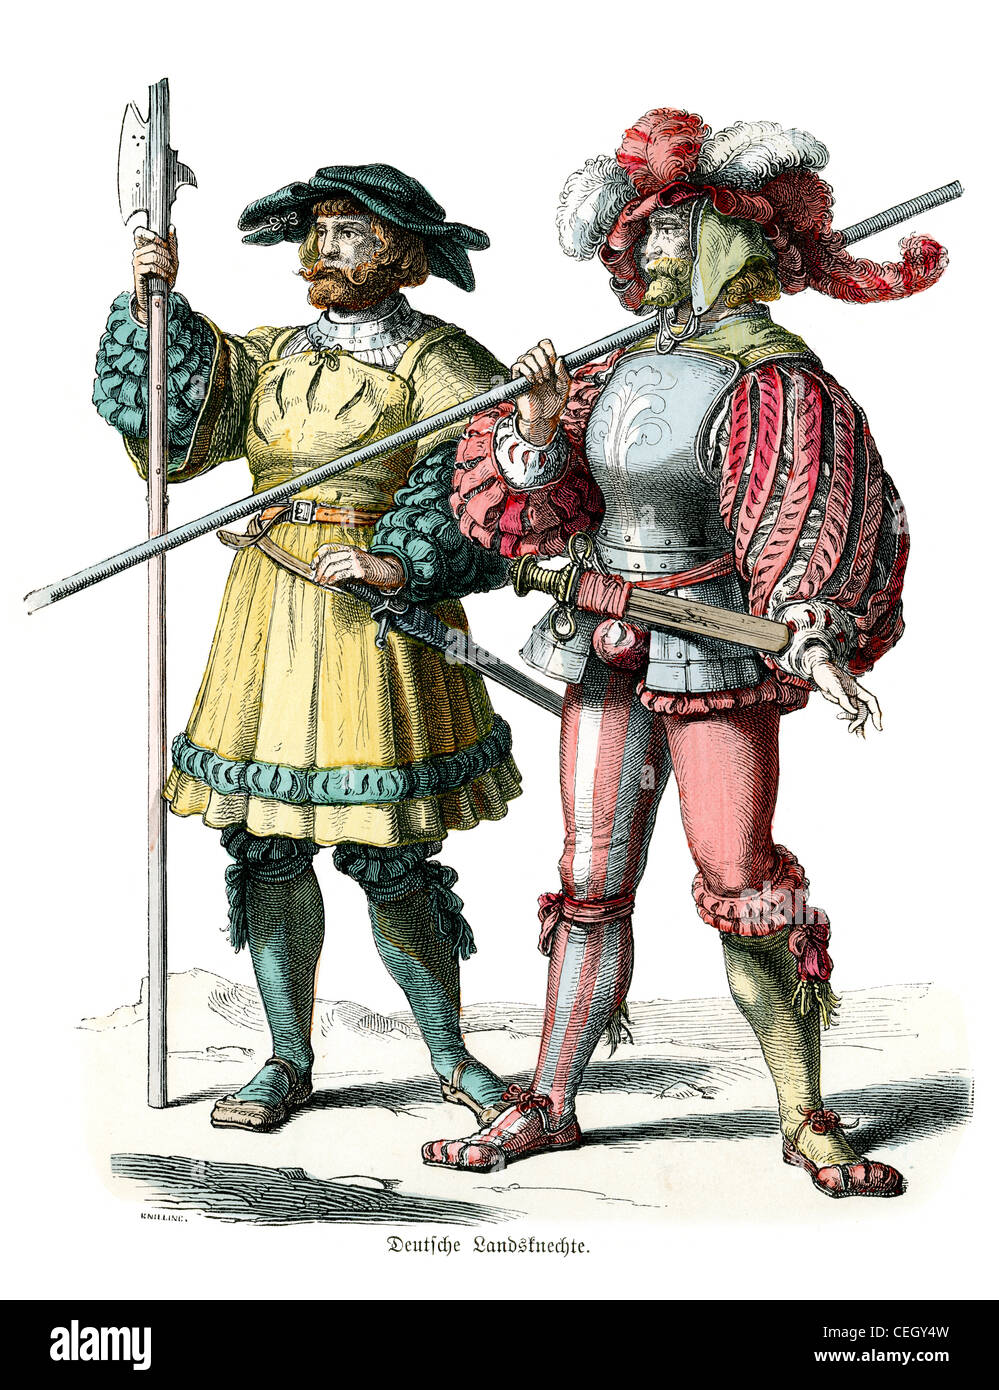 a-couple-of-german-landsknecht-from-the-16th-century-CEGY4W.jpg